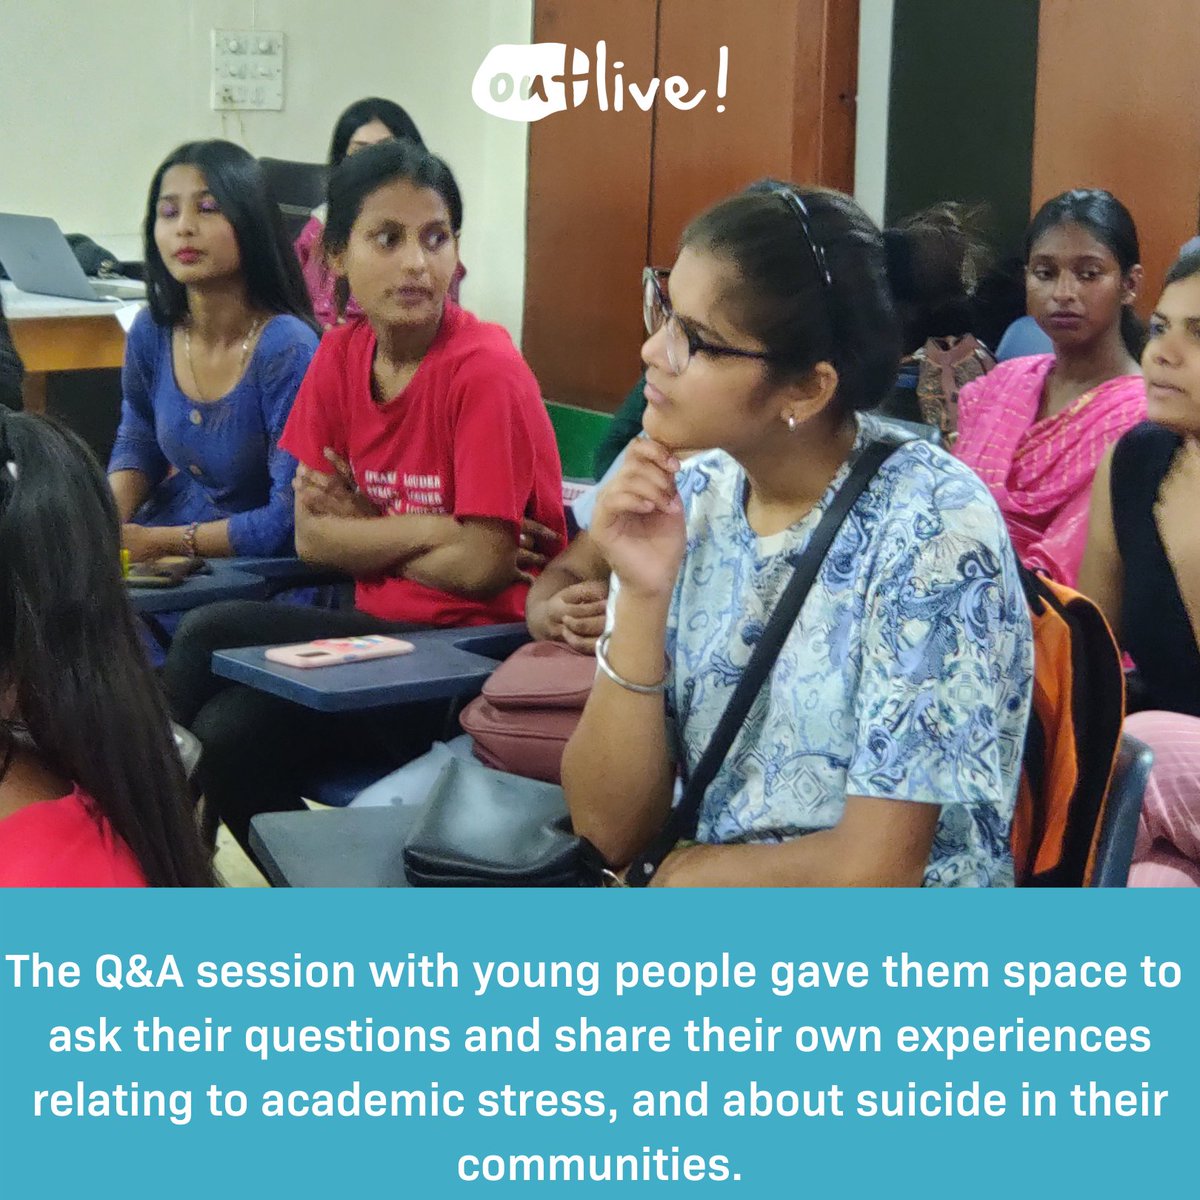 On 29th May, Outlive hosted its very first event in partnership with @theypfoundation at Ghalib Academy with the young people from Nizamuddin basti and Sundar Nagar Nursery basti areas in New Delhi. 
#mentalhealthadvocate #students #youthmentalhealth #managingstress